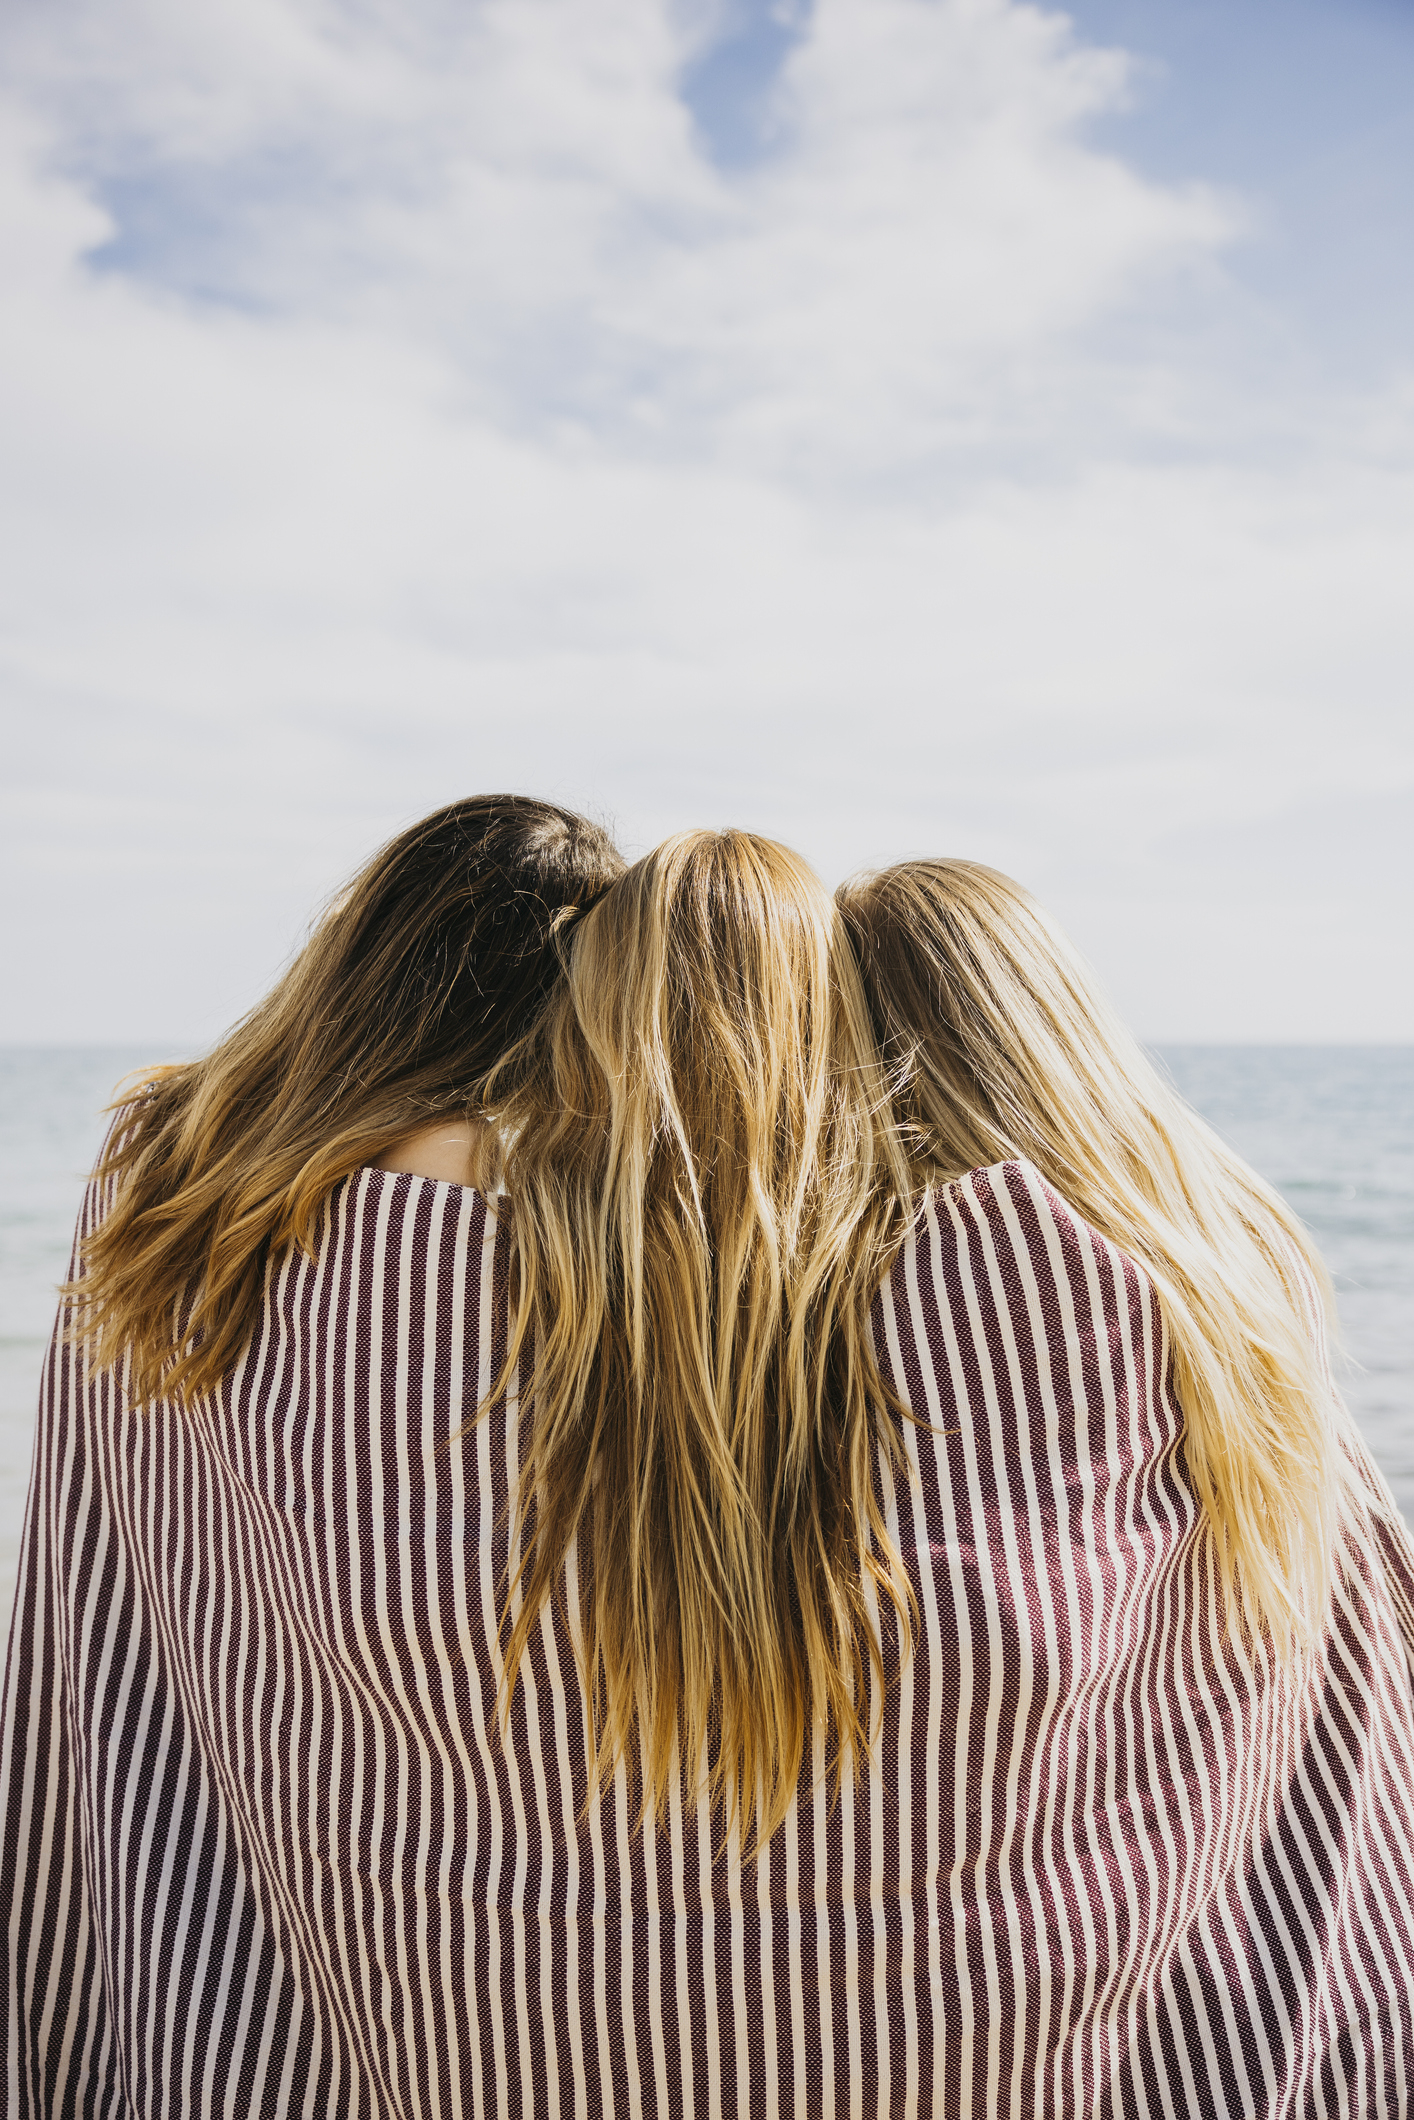 Three friends wrapped inside a blanket as they stand and look out at the beach